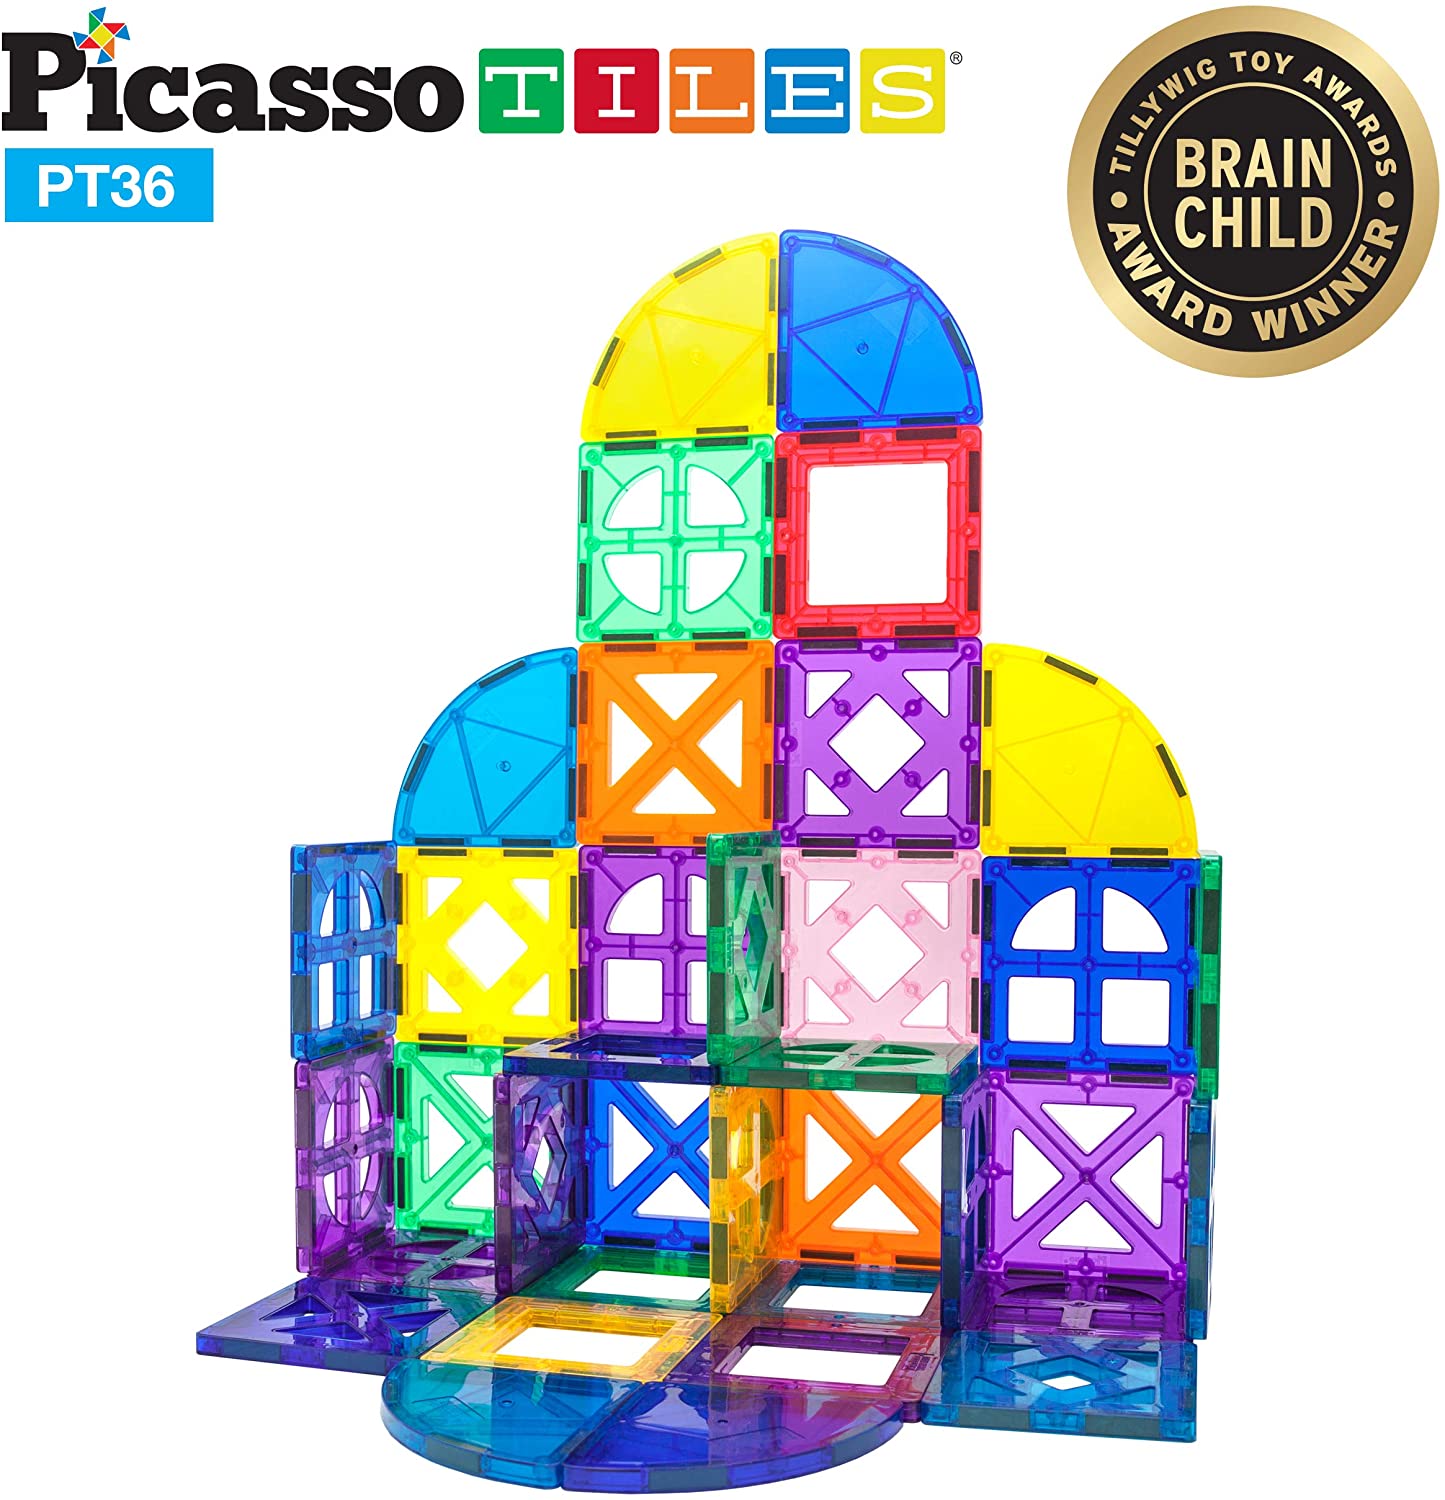 PicassoTiles 36 Piece Magnetic Building Block Quarter Round and Window Set Magnet Construction Toy Educational Kit Engineering STEM